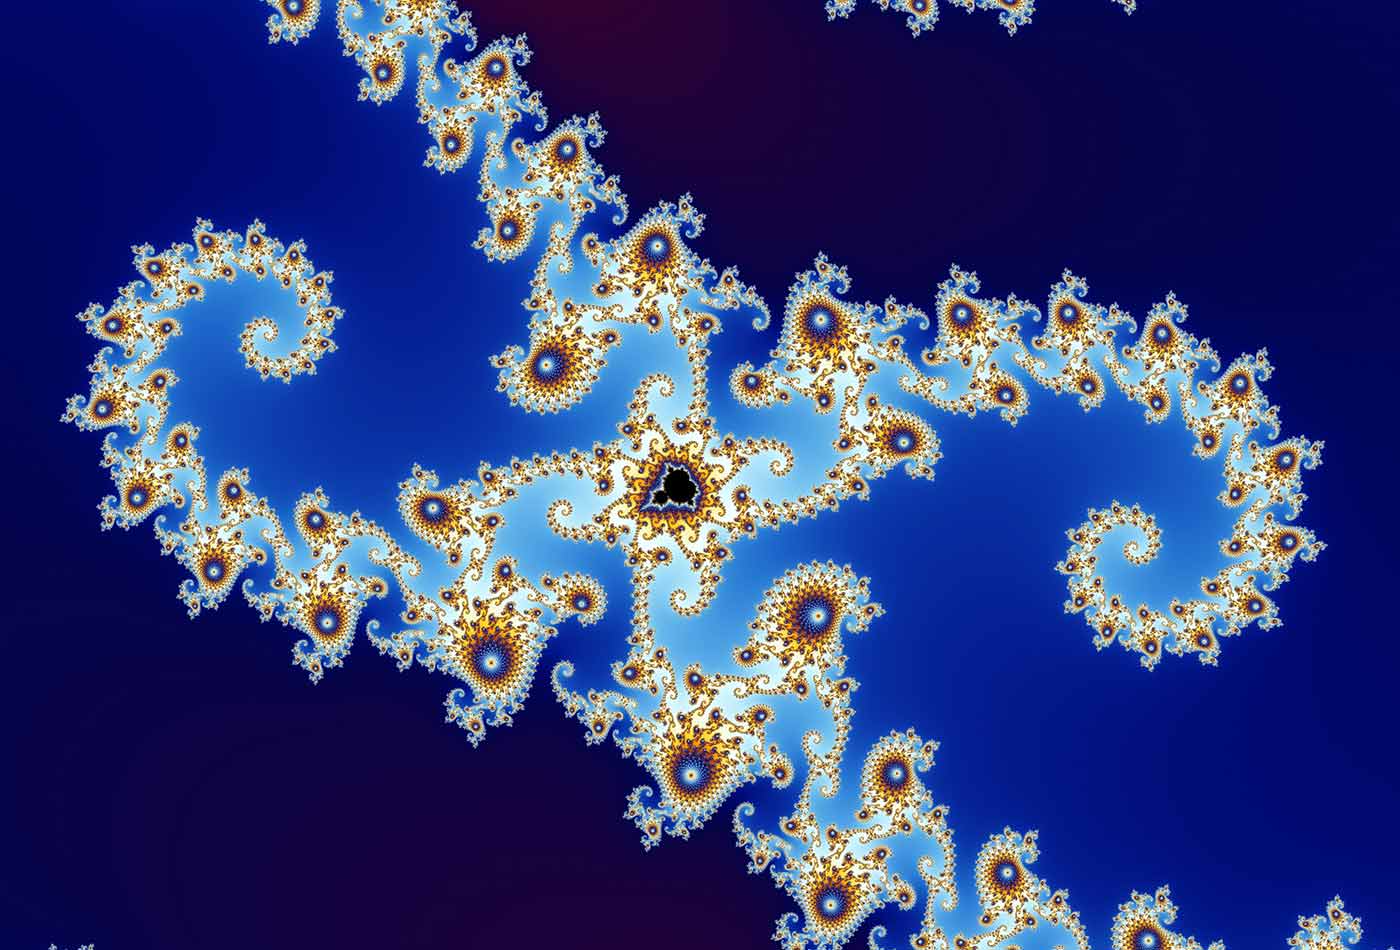 Partial view of the Mandelbrot set. Step 6 of a zoom sequence: Satellite.